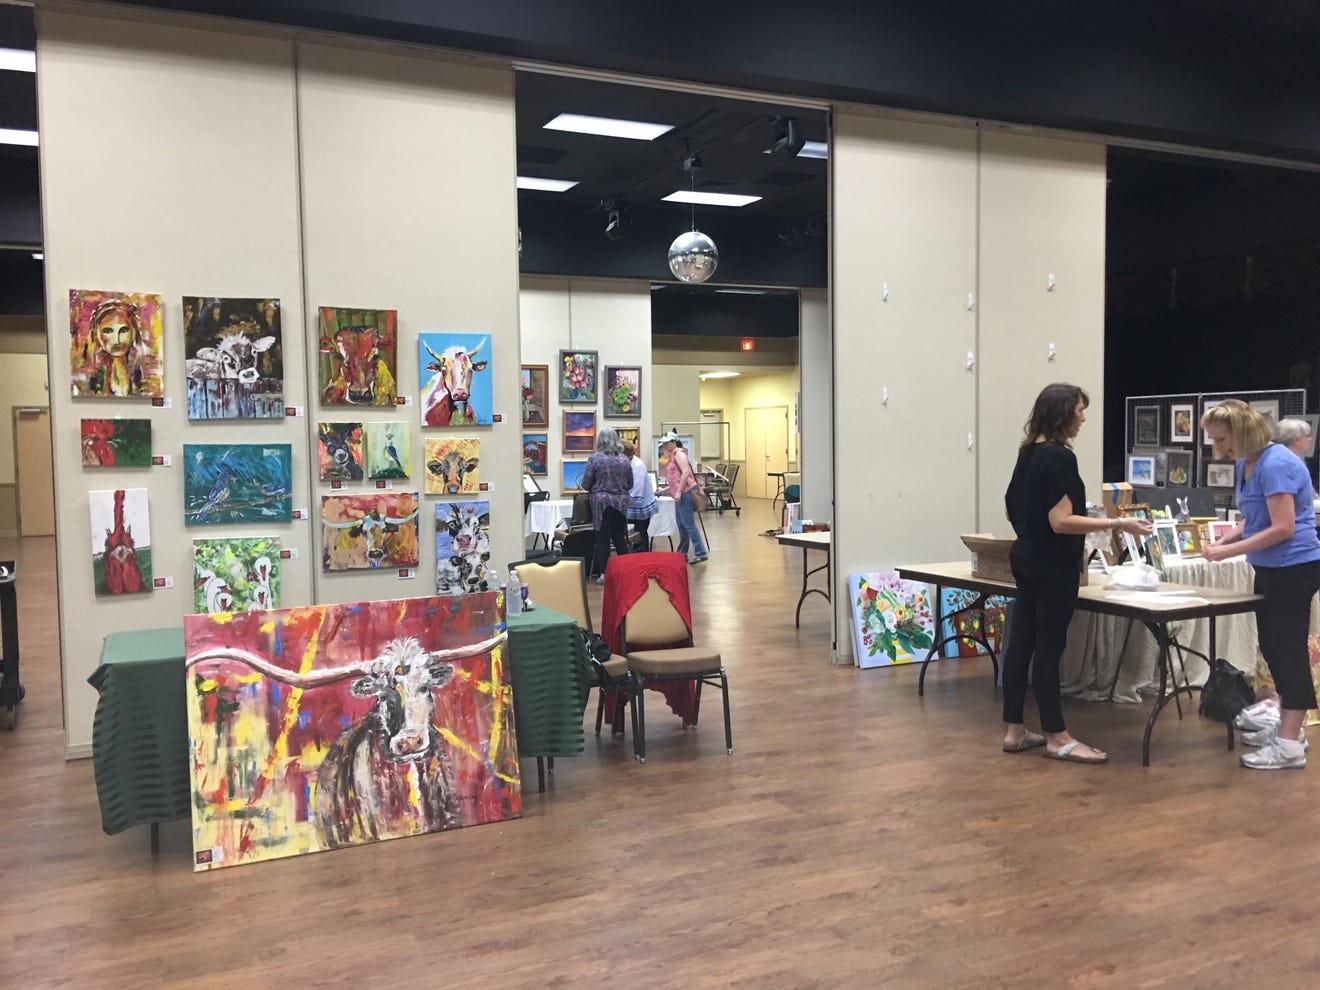 The Cool Arts Show returns to Lakeway to showcase local talent